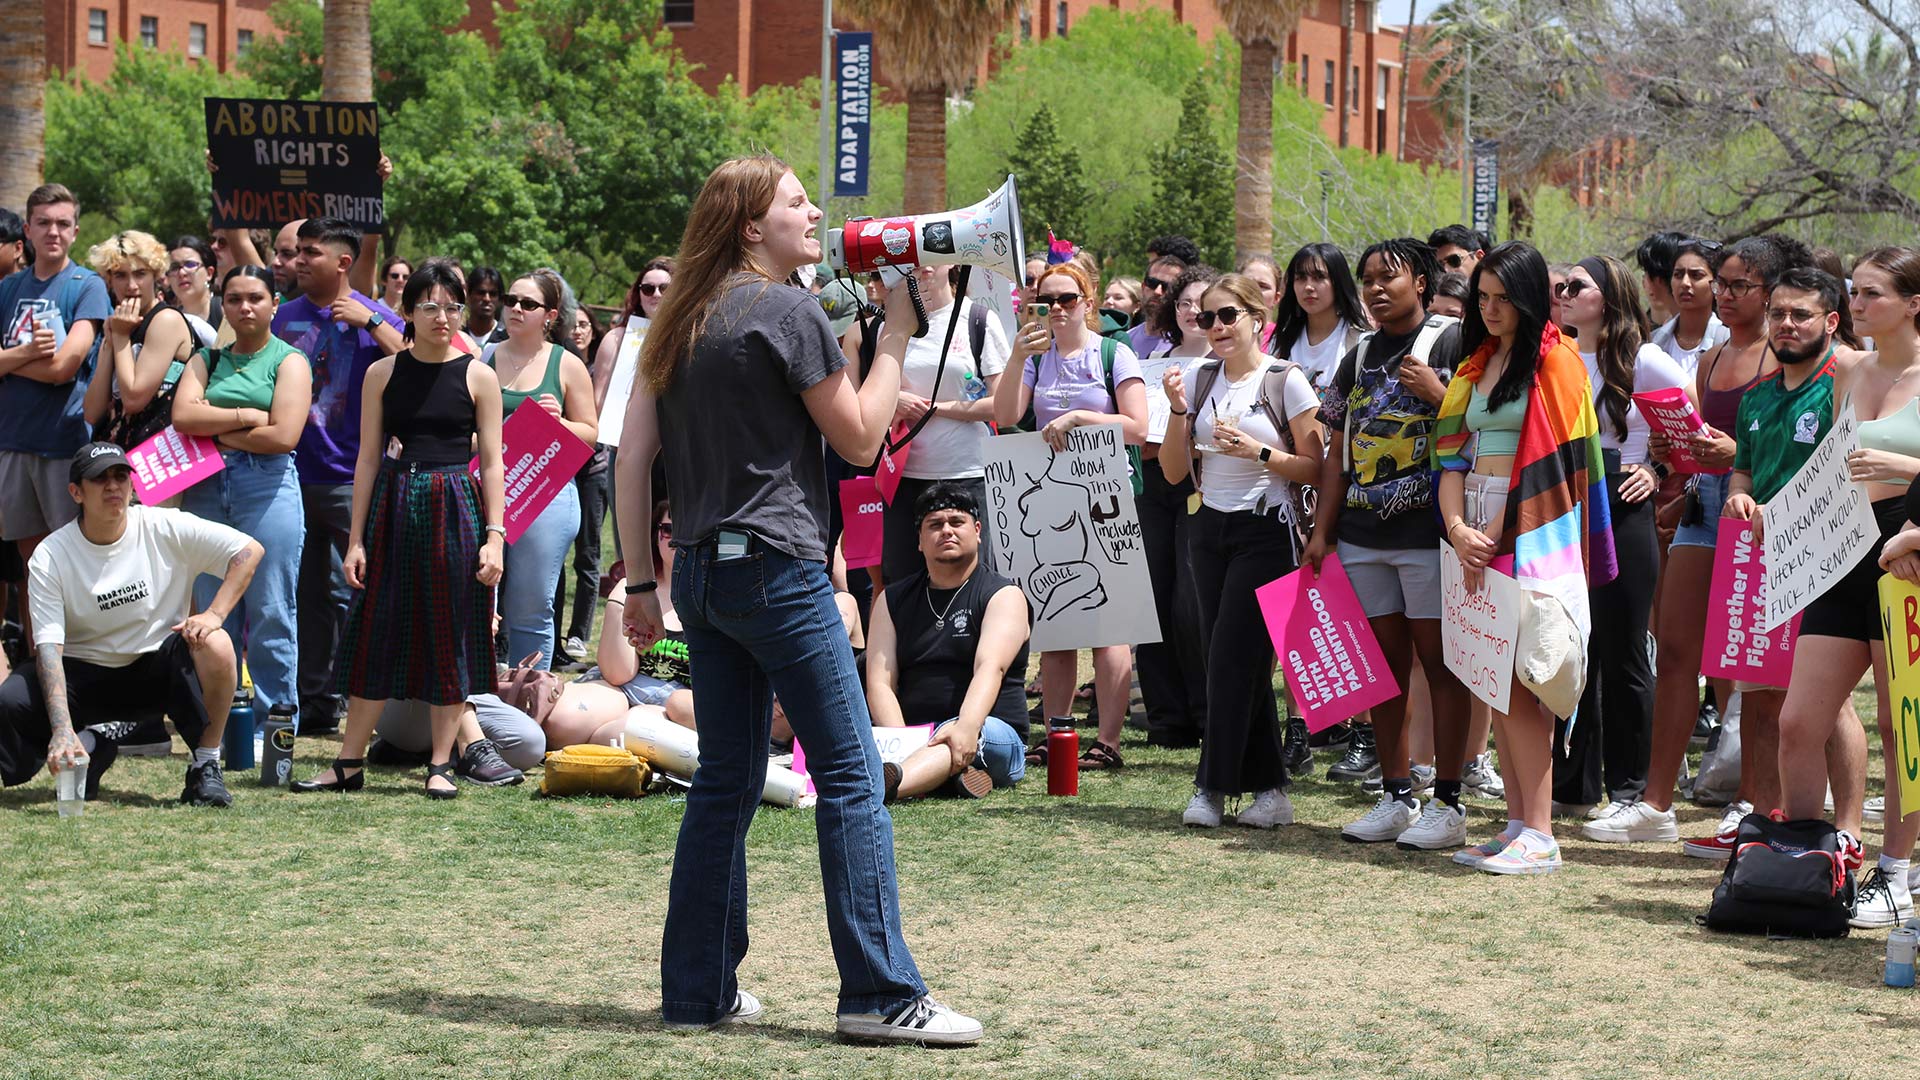 Over 100 UA students gathered on the UA Mall to counter-protest the anti-abortion group, the Center for Bio-Ethical Reform's demonstration "Genocide Awareness Project," that depicted graphic images on Thursday, April 13. 